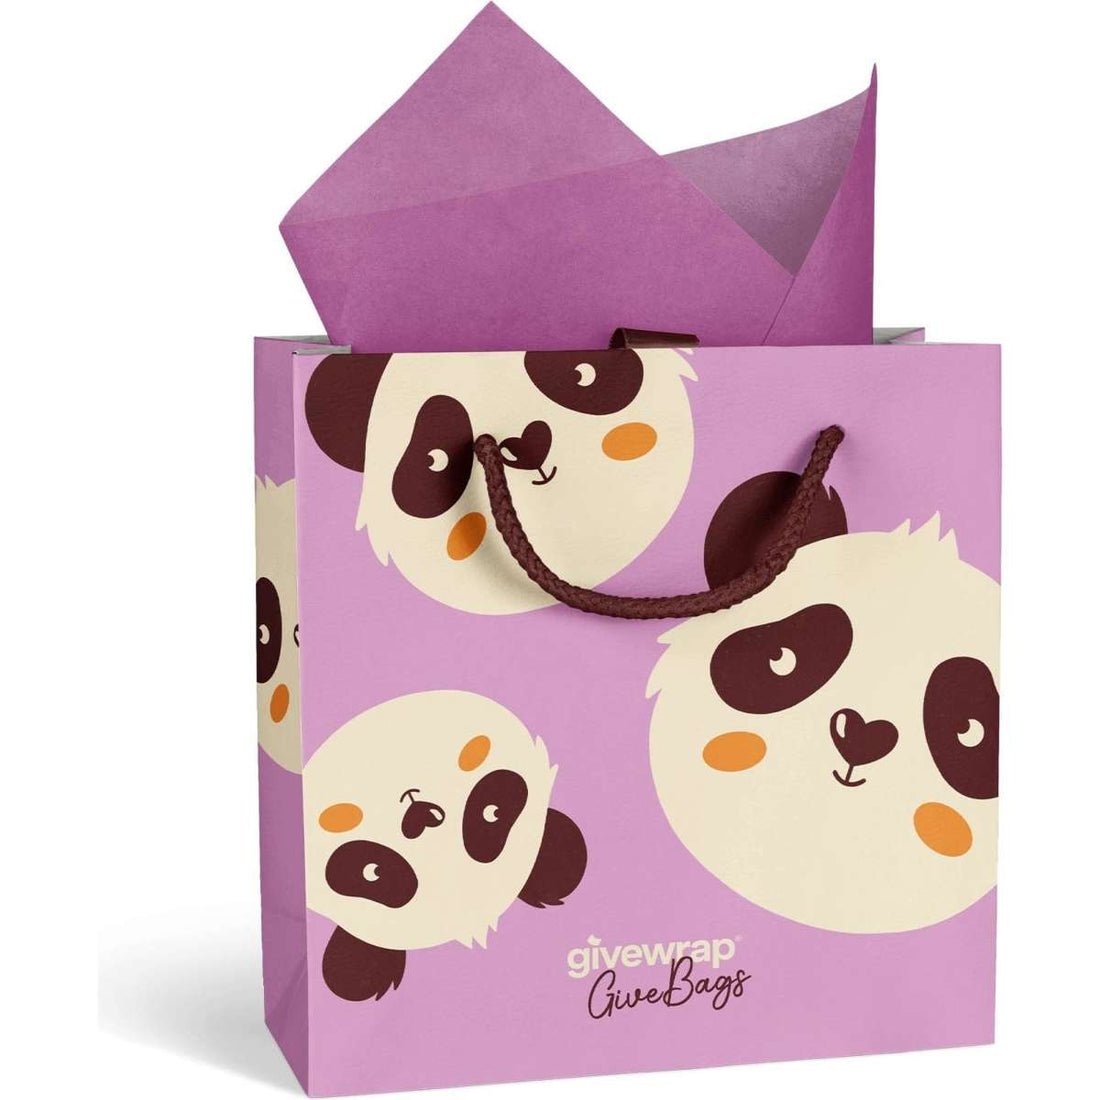 Givewrap Panda Gift 3 Piece Set - Gift Card, Wrapping Paper and Gift Bag